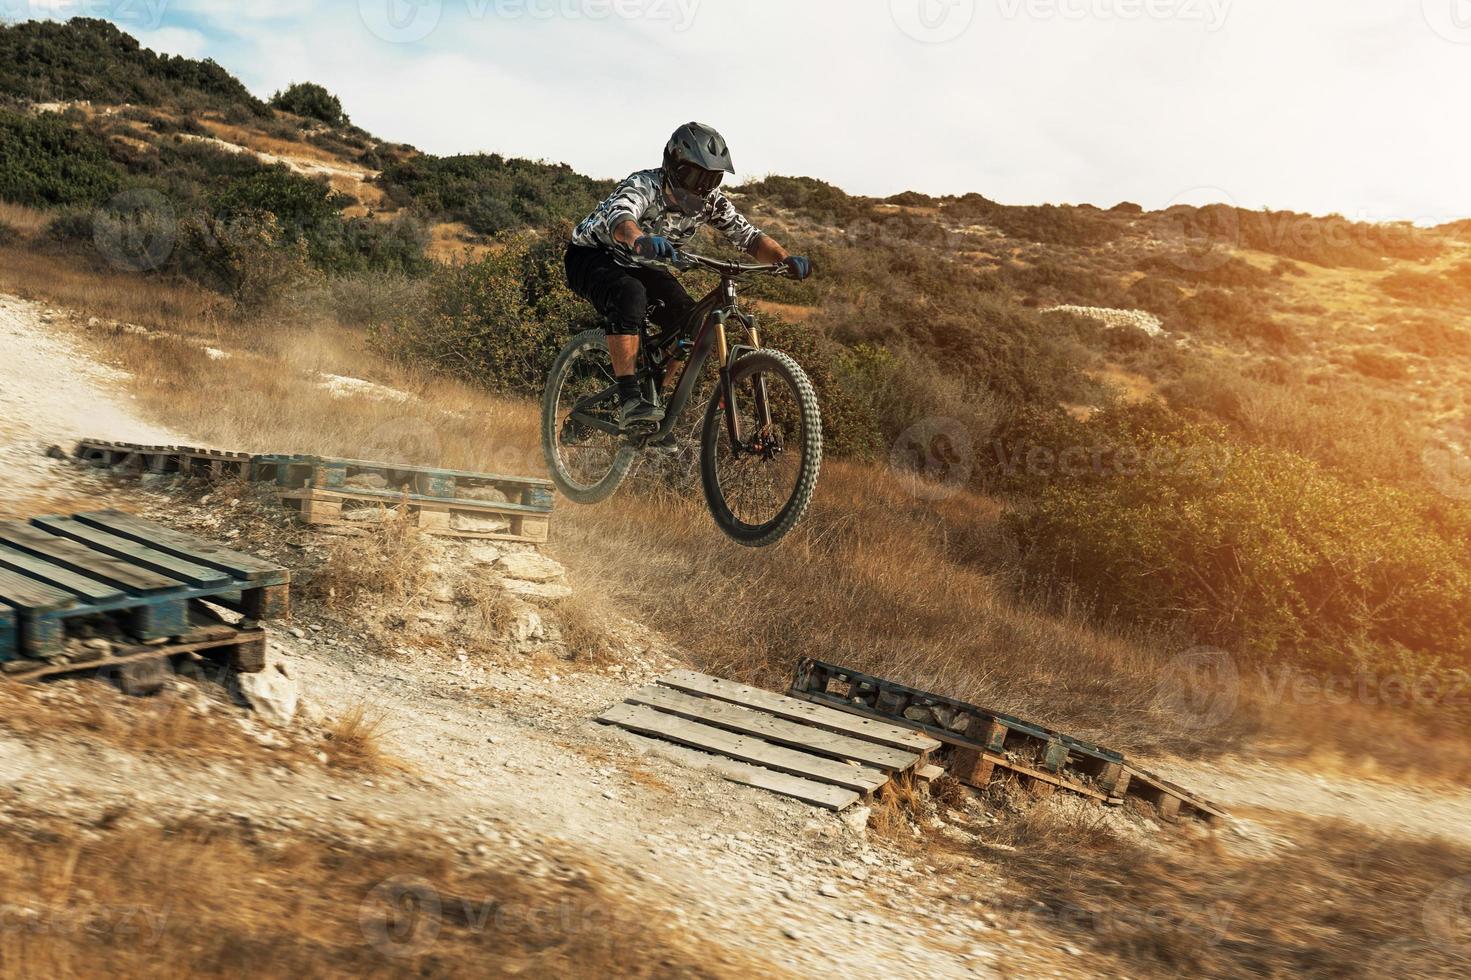 MTB bike rider jumping during downhill ride on his bicycle in mountains photo